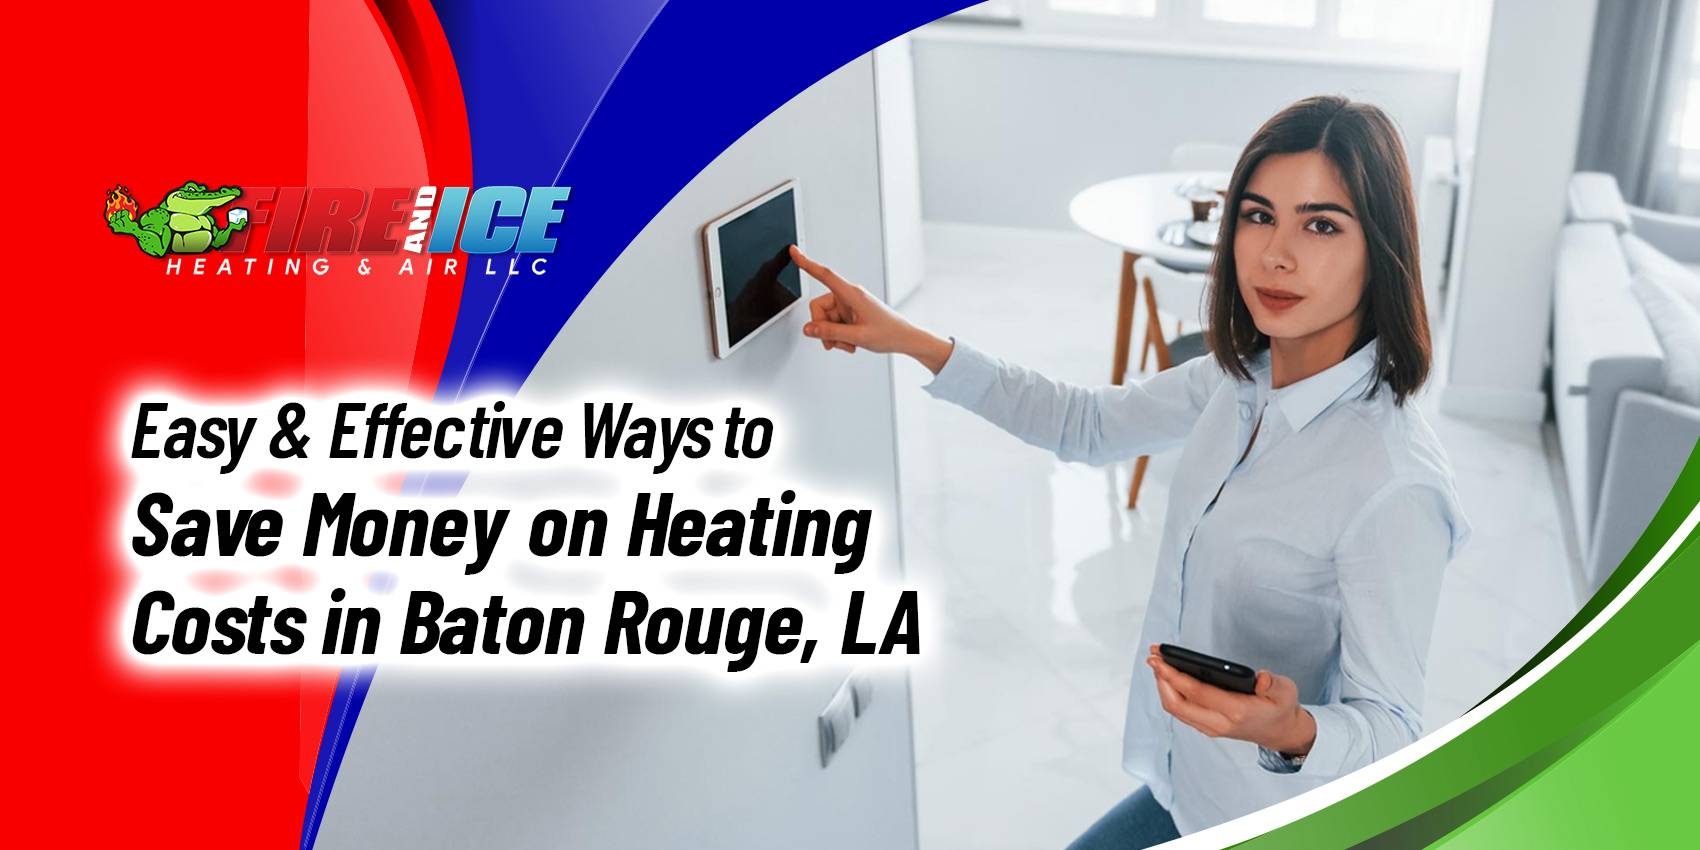 Easy & Effective Ways to Save Money on Heating Costs in Baton Rouge, LA